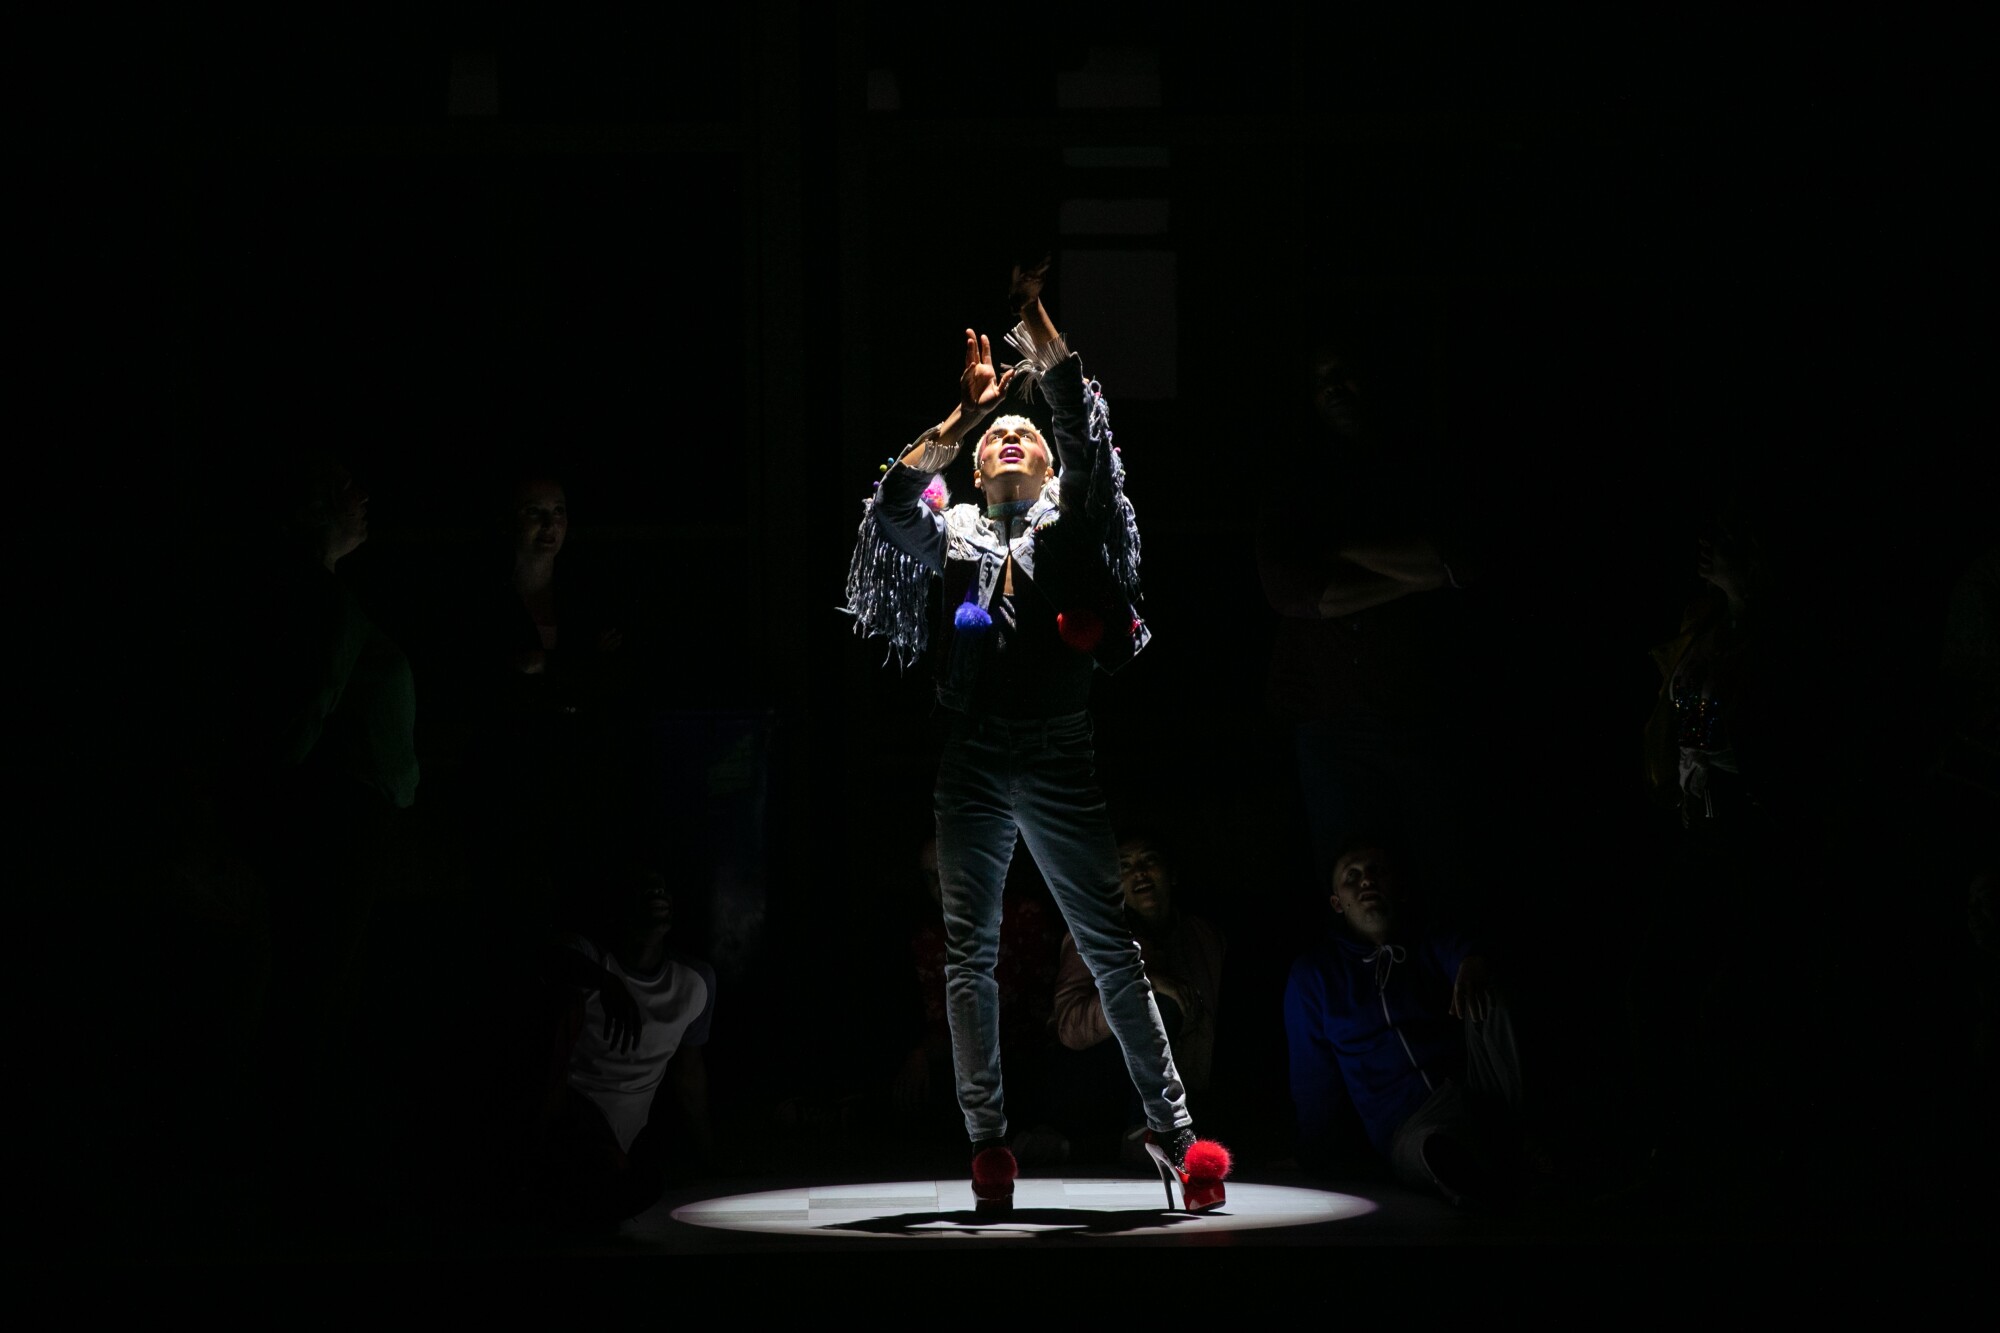 A man stands under a spotlight with his hands raised.